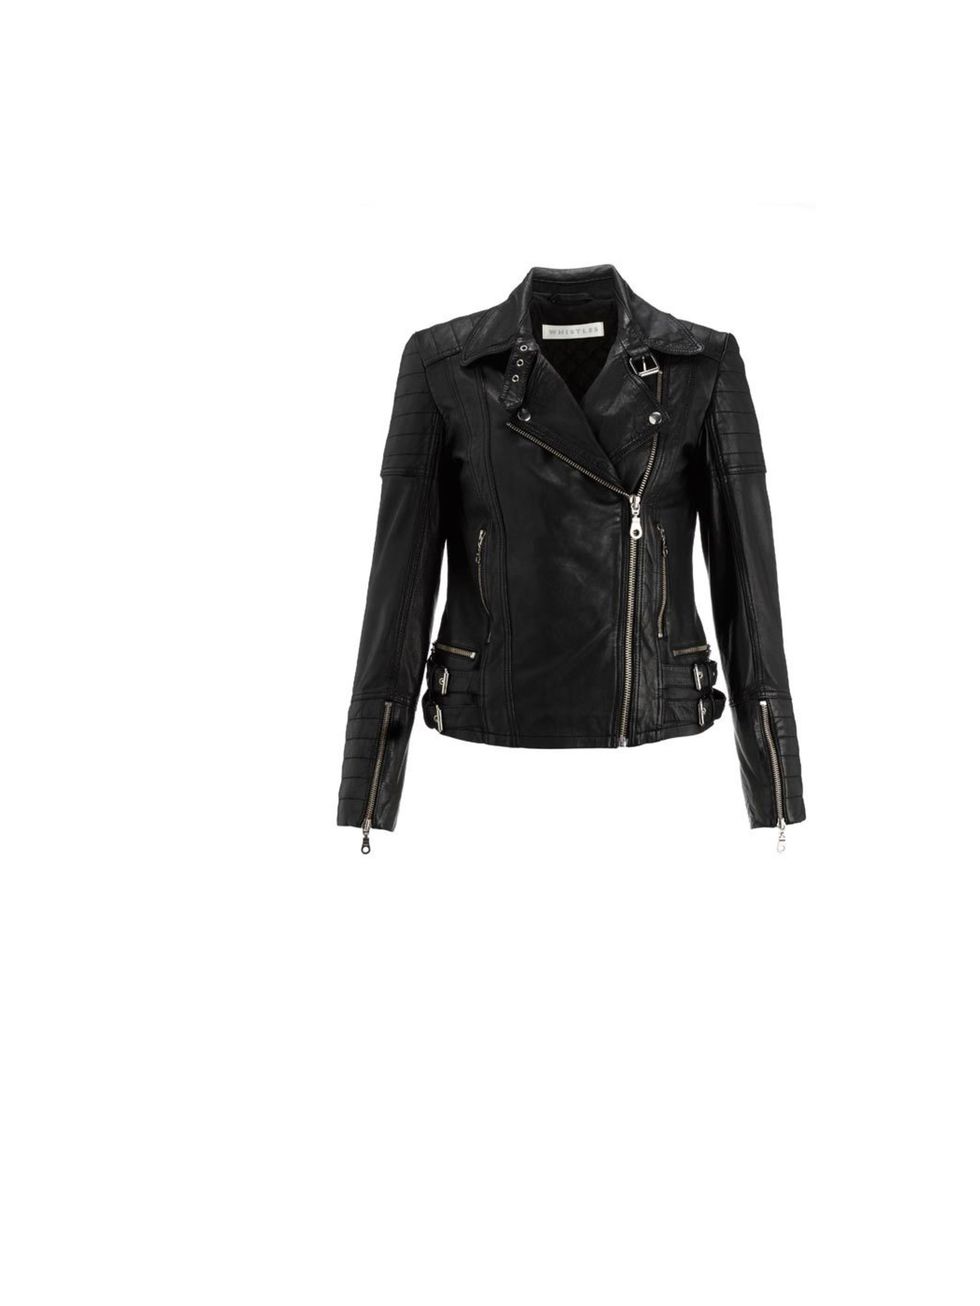 <p><a href="http://www.whistles.co.uk/fcp/categorylist/dept/shop?resetFilters=true">Whistles</a> extended shoulder leather jacket, £295</p>